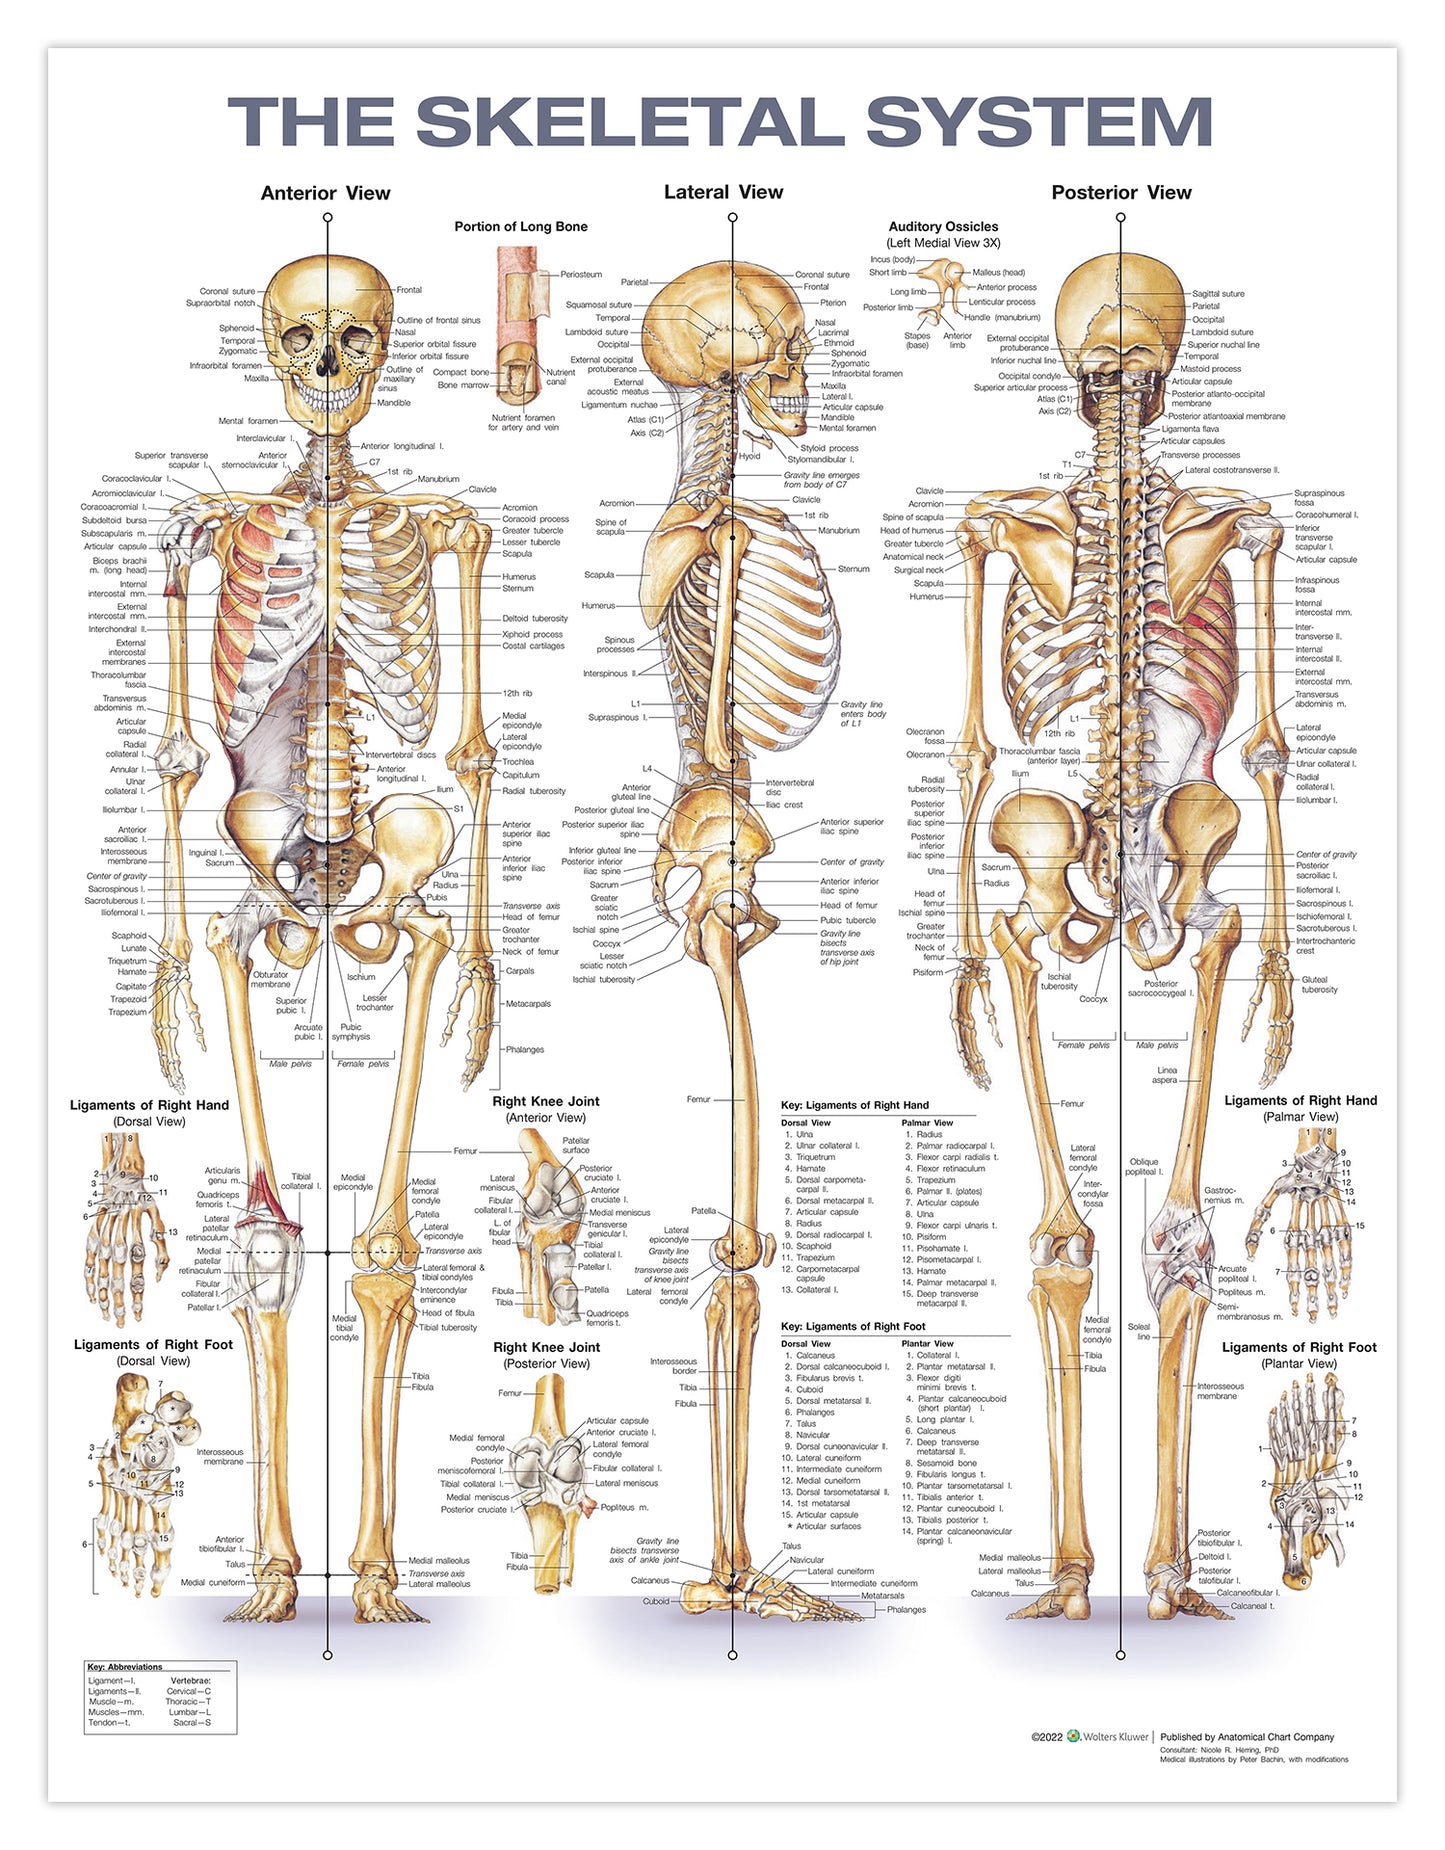 Classic skeleton poster which also illustrates ligaments in English